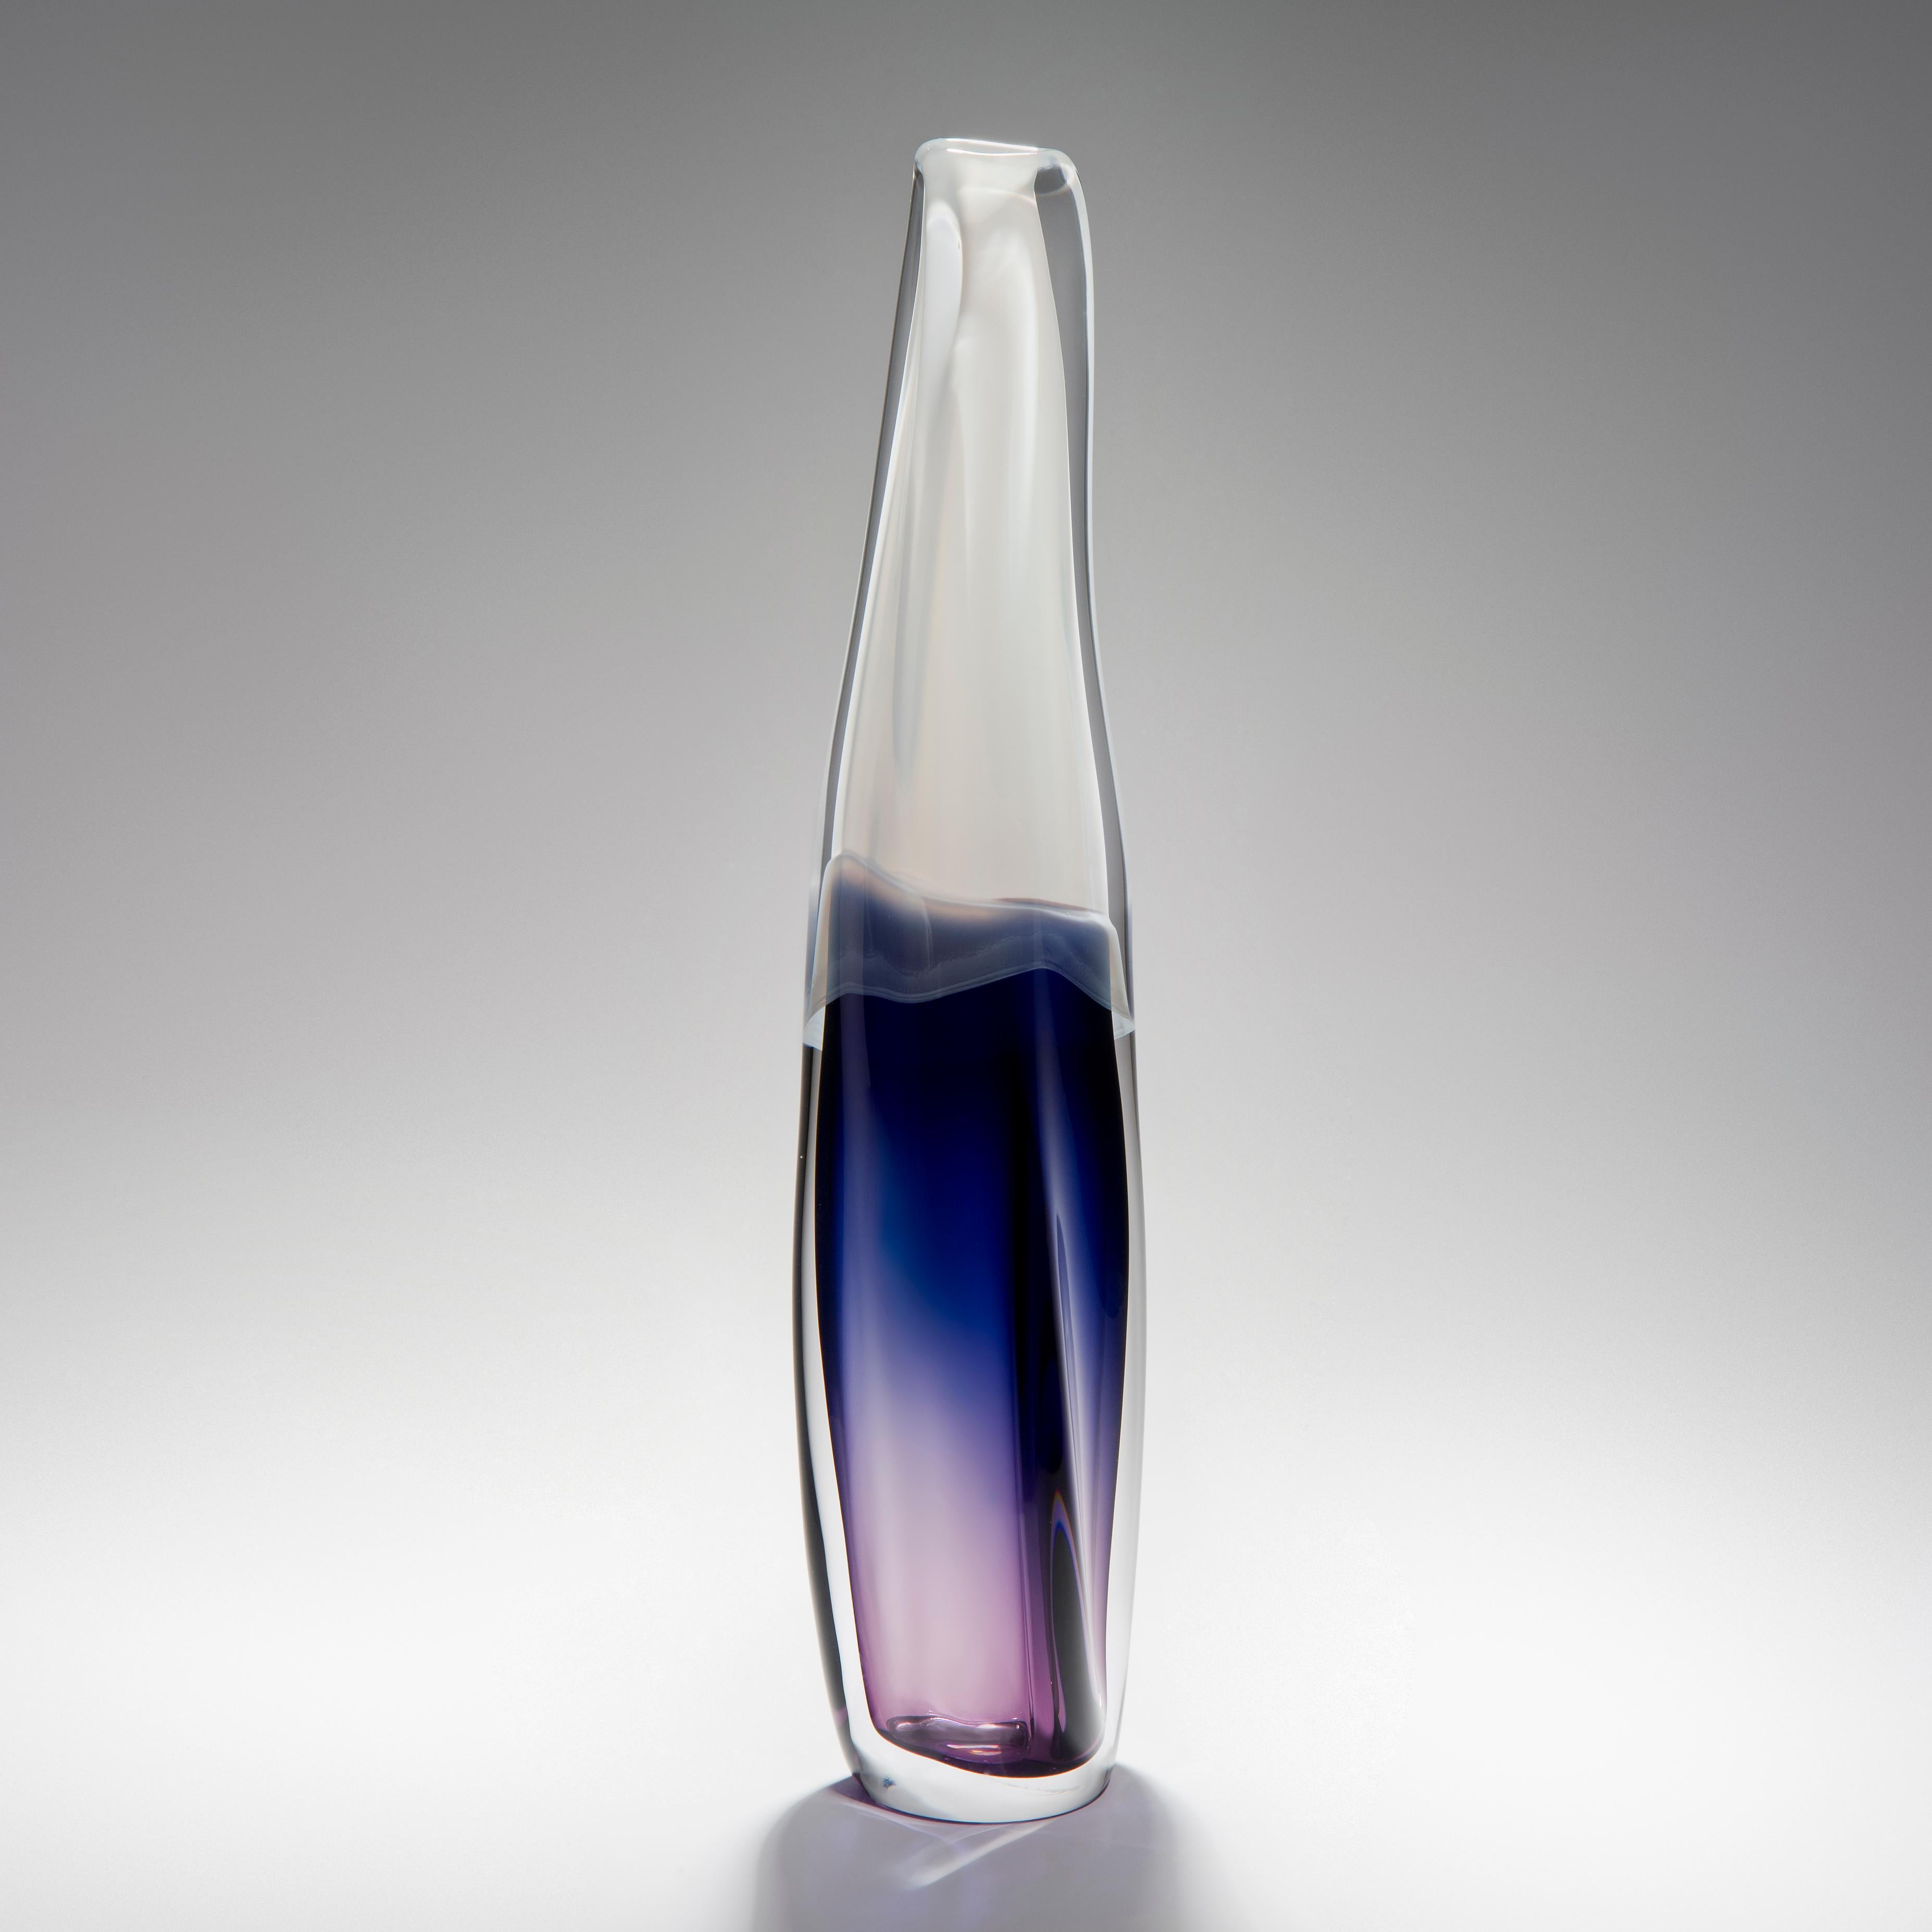 Sommercalmo 138 is a unique hand blown sculptural vase by the British artist Vic Bamforth. Soft opaque white and mesmerising deep purple meet and are encased in clear glass to create this stunning piece. With soft, twisting lines, the form has